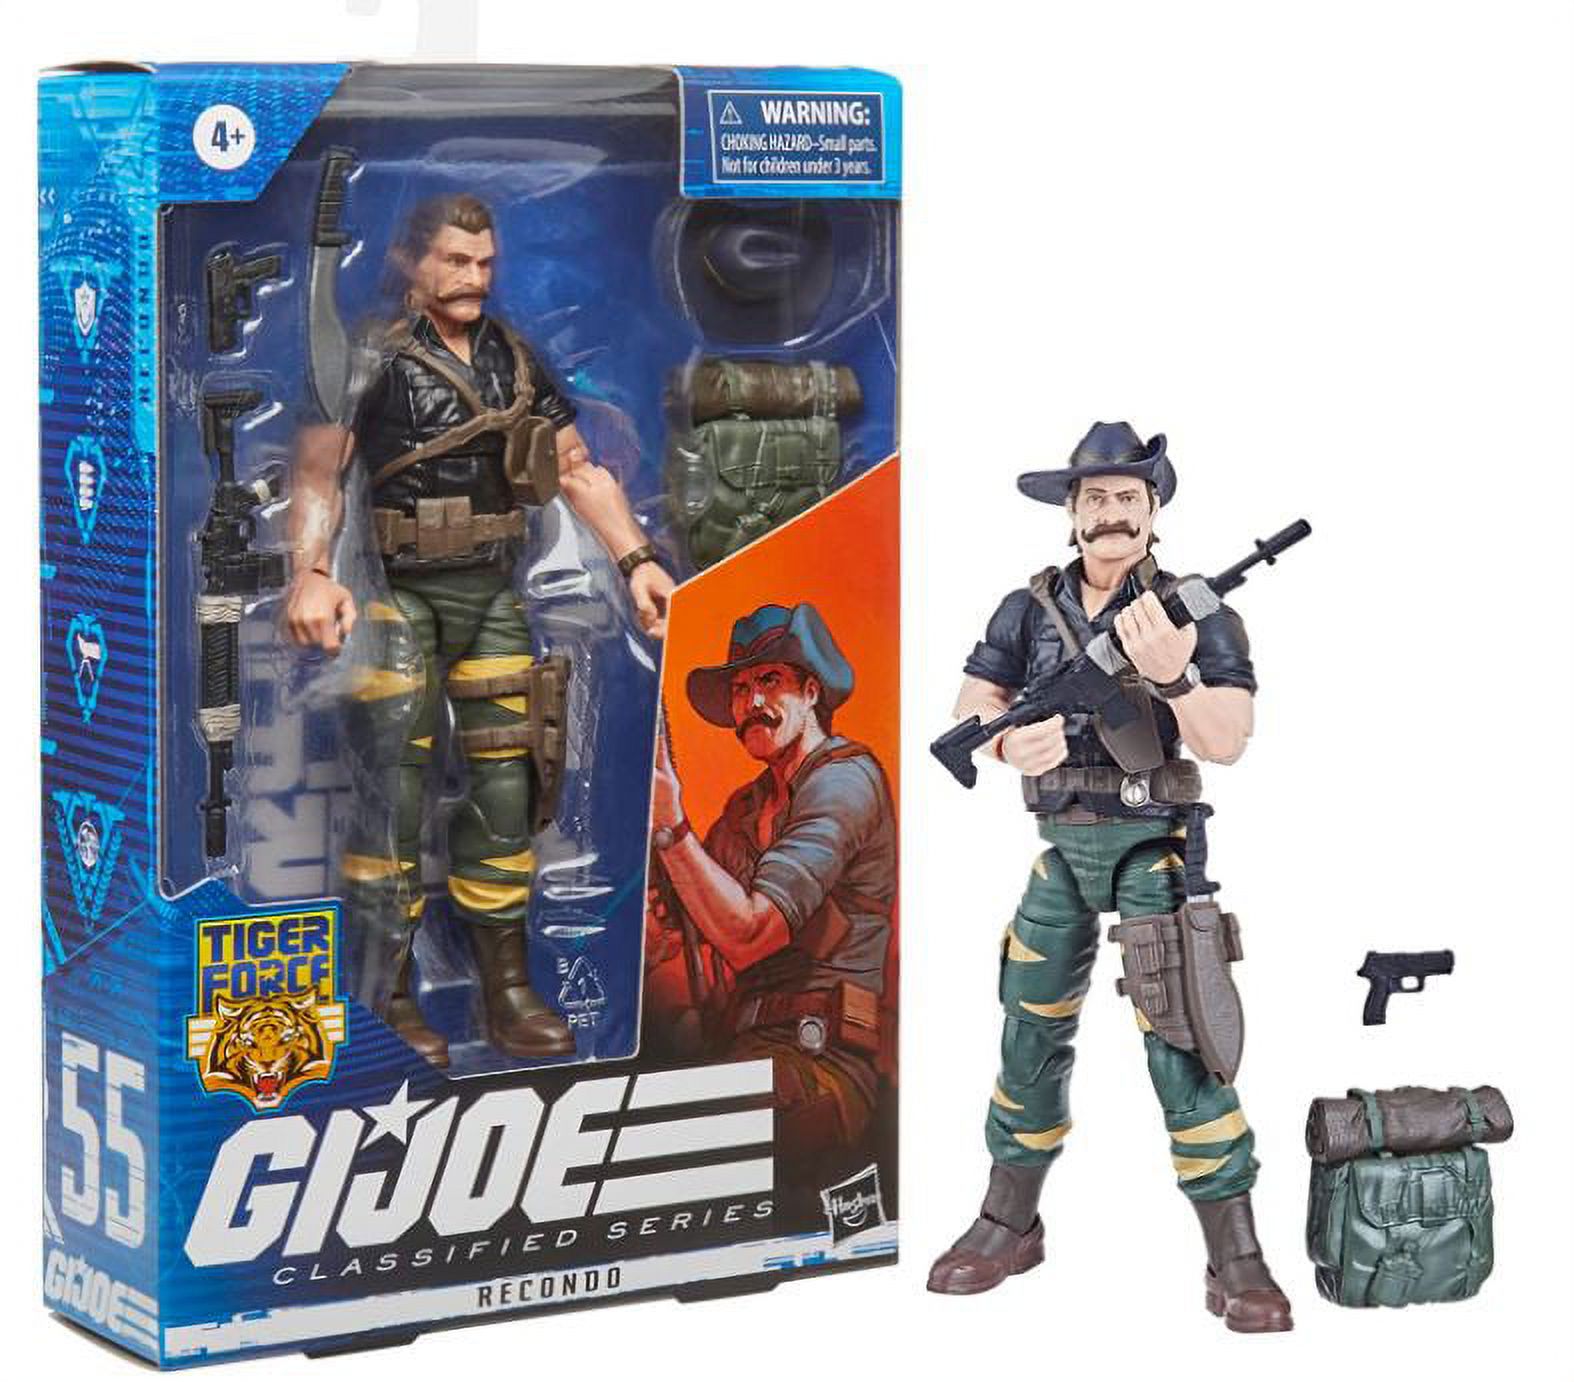 G.I. Joe Classified Series Tiger Force Recondo Action Figure - image 2 of 5